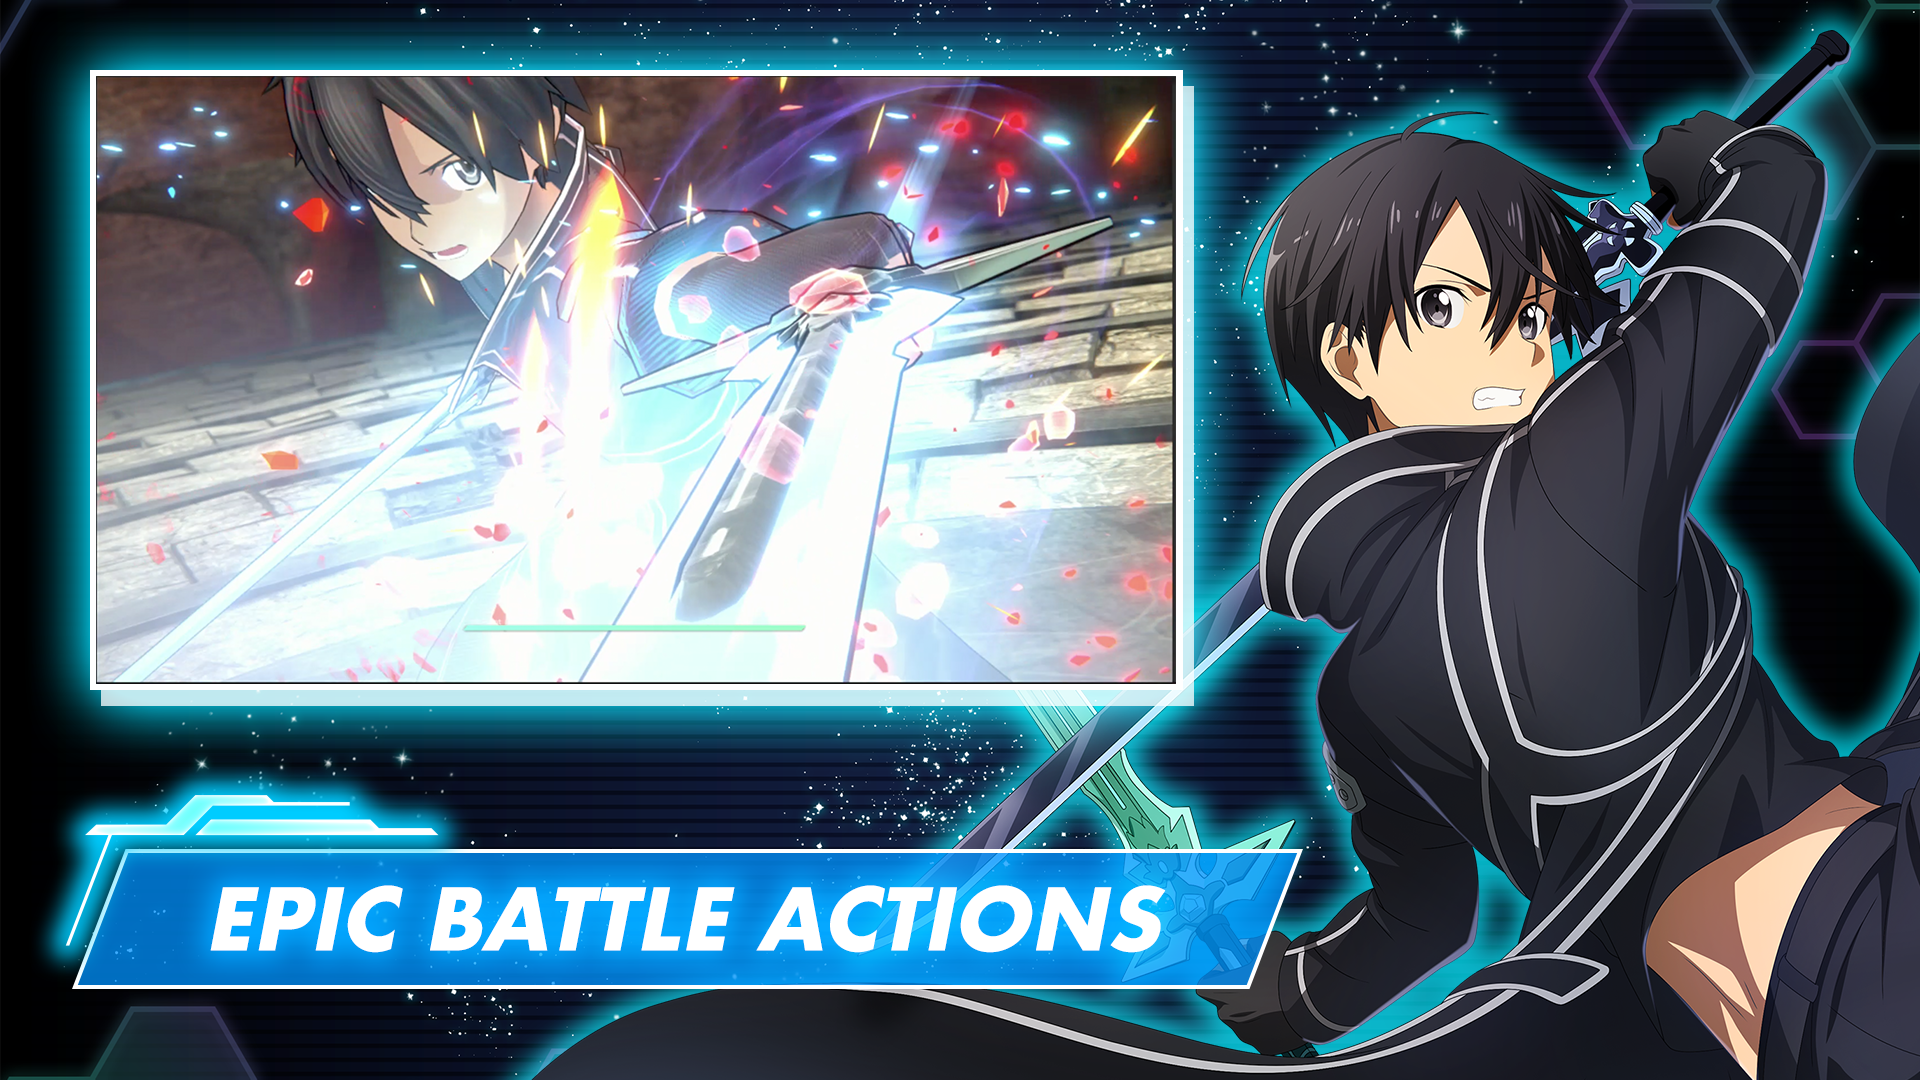 Download and play Sword Art Online VS on PC with MuMu Player